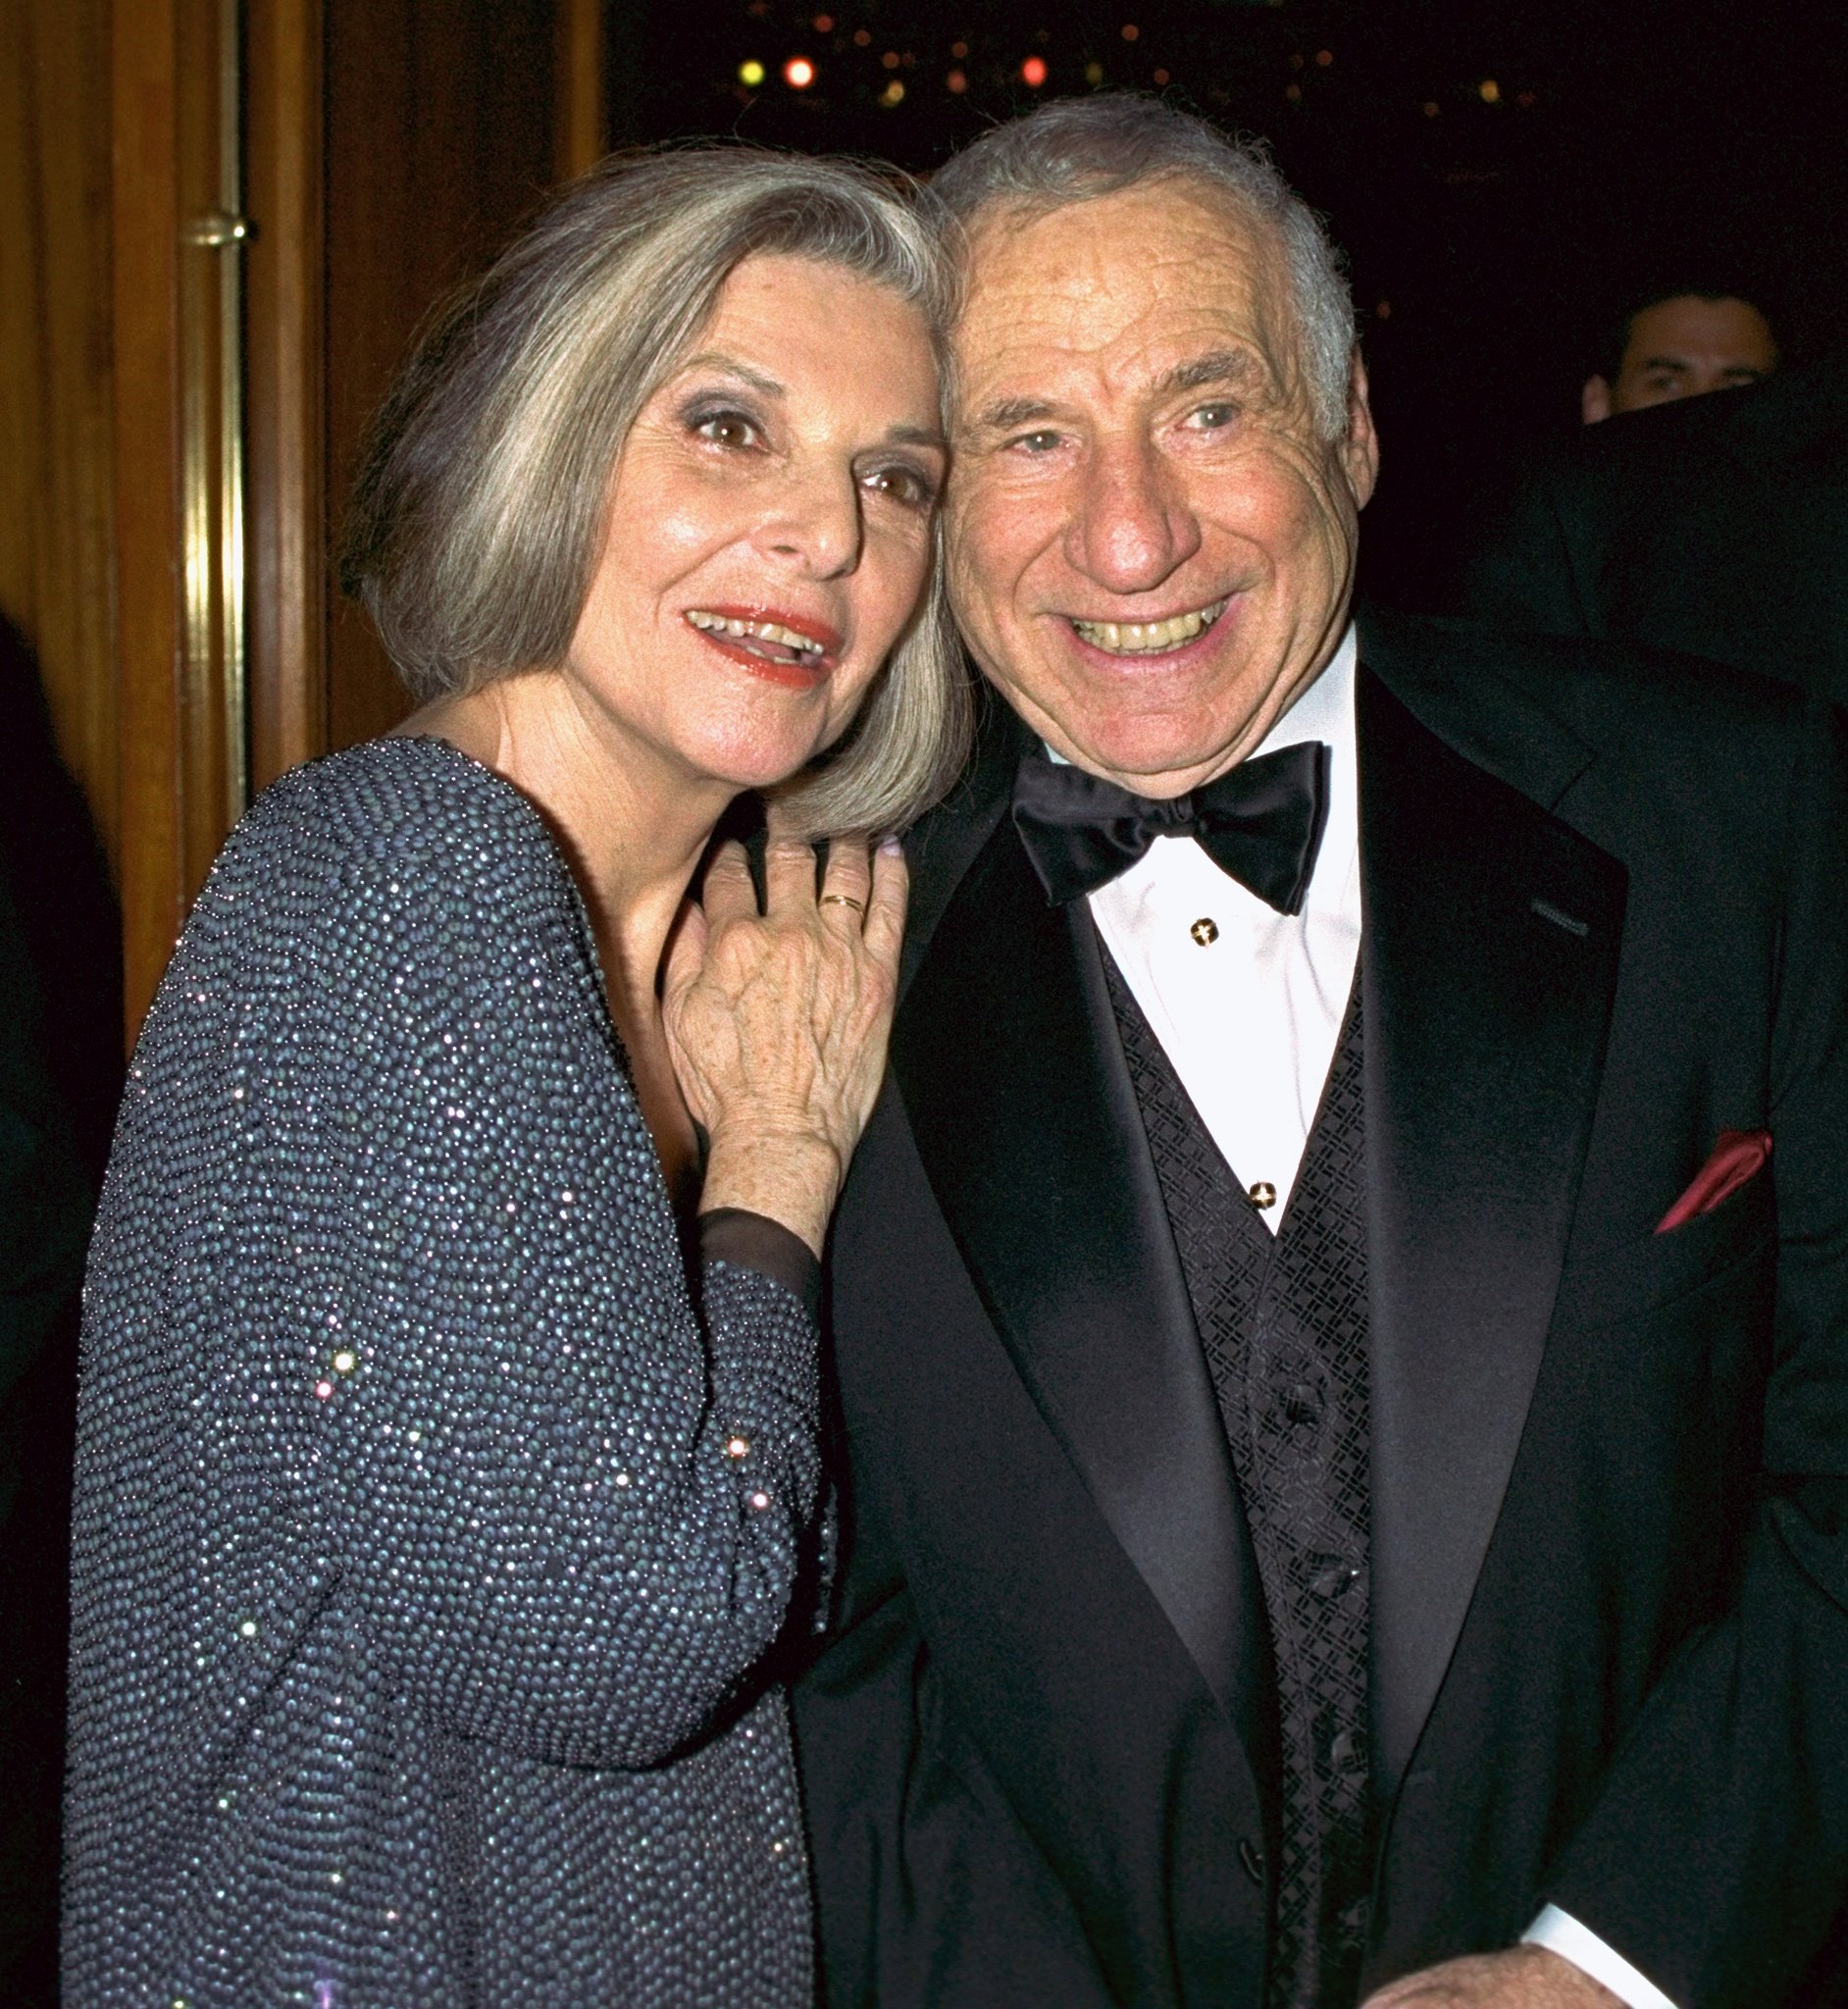 Mel Brooks and his wife actress Anne Bancroft during the Tony Awards party at the Sheraton Hotel. Brooks' show, "The Producers" on January 1, 2000 ┃Source: Getty Images